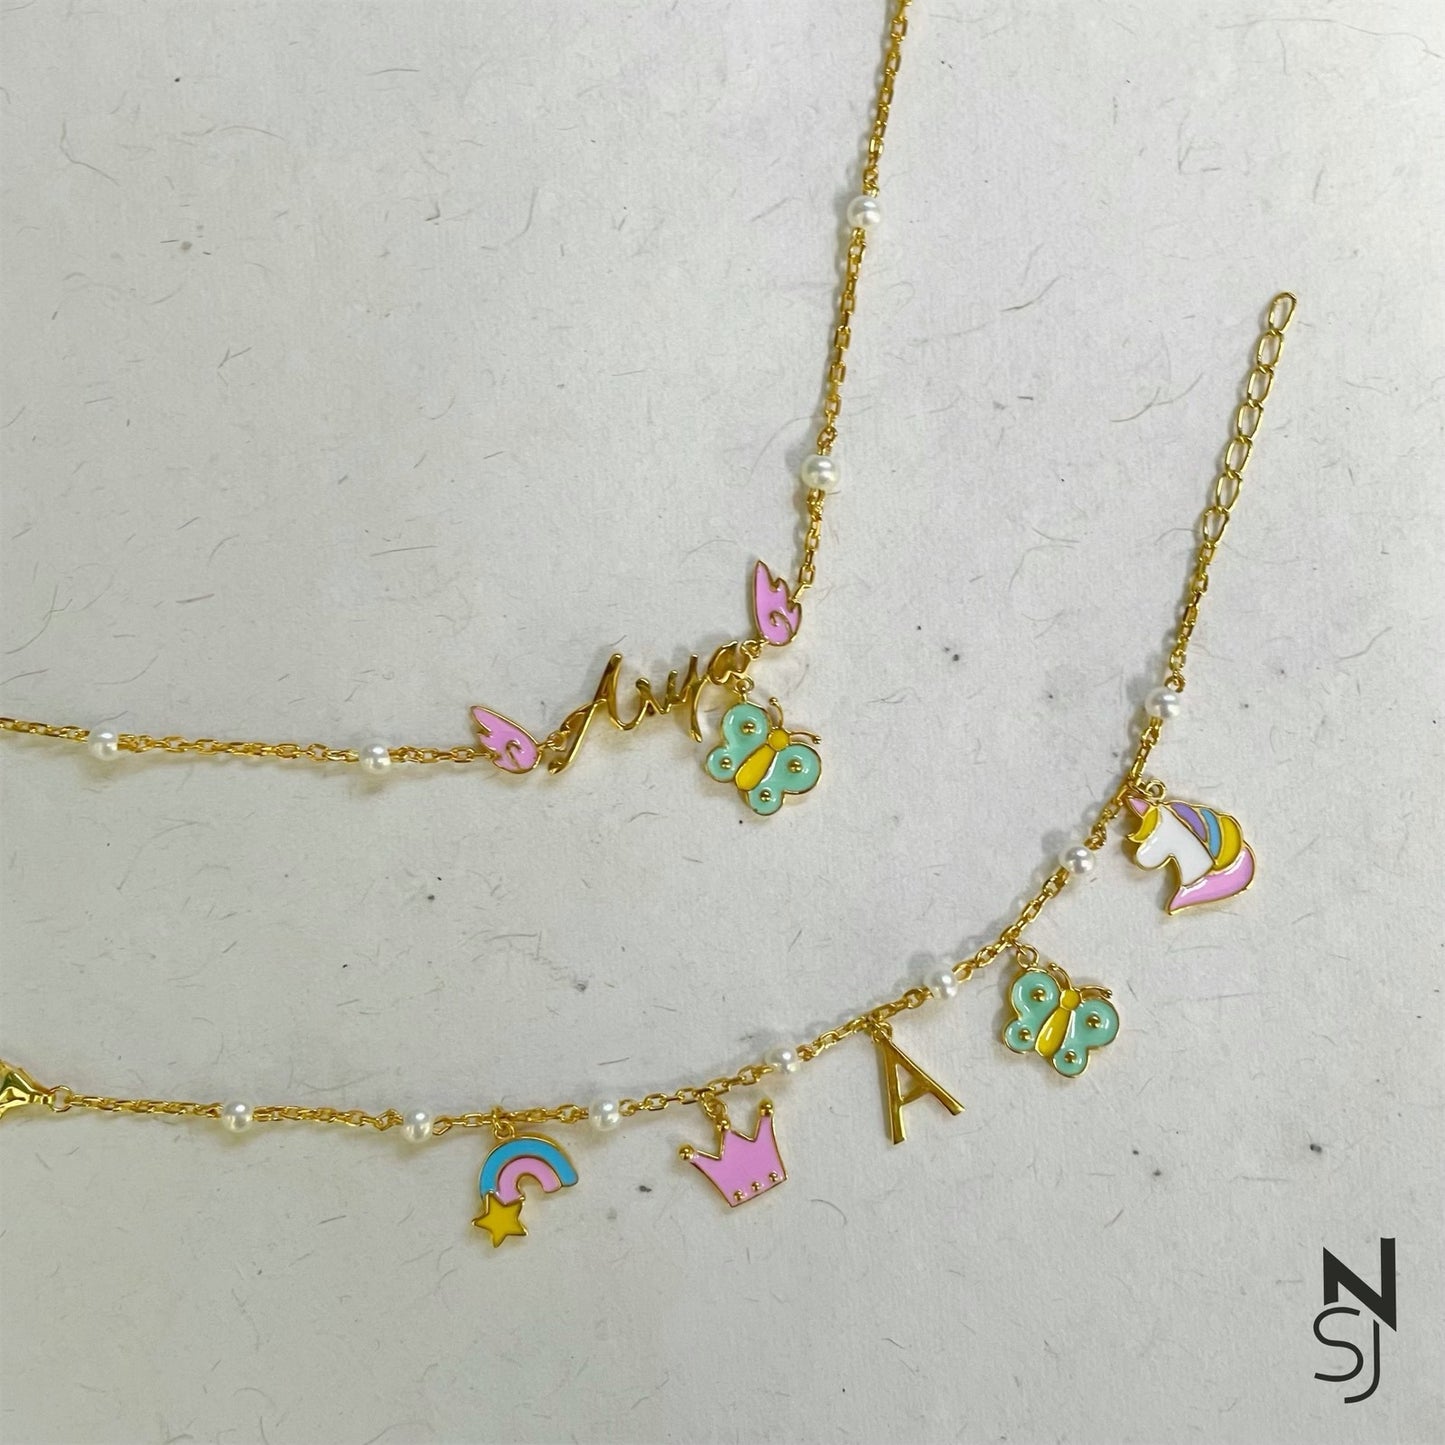 Name Neckchain & Charm Bracelet Set in Gold-Plated Silver